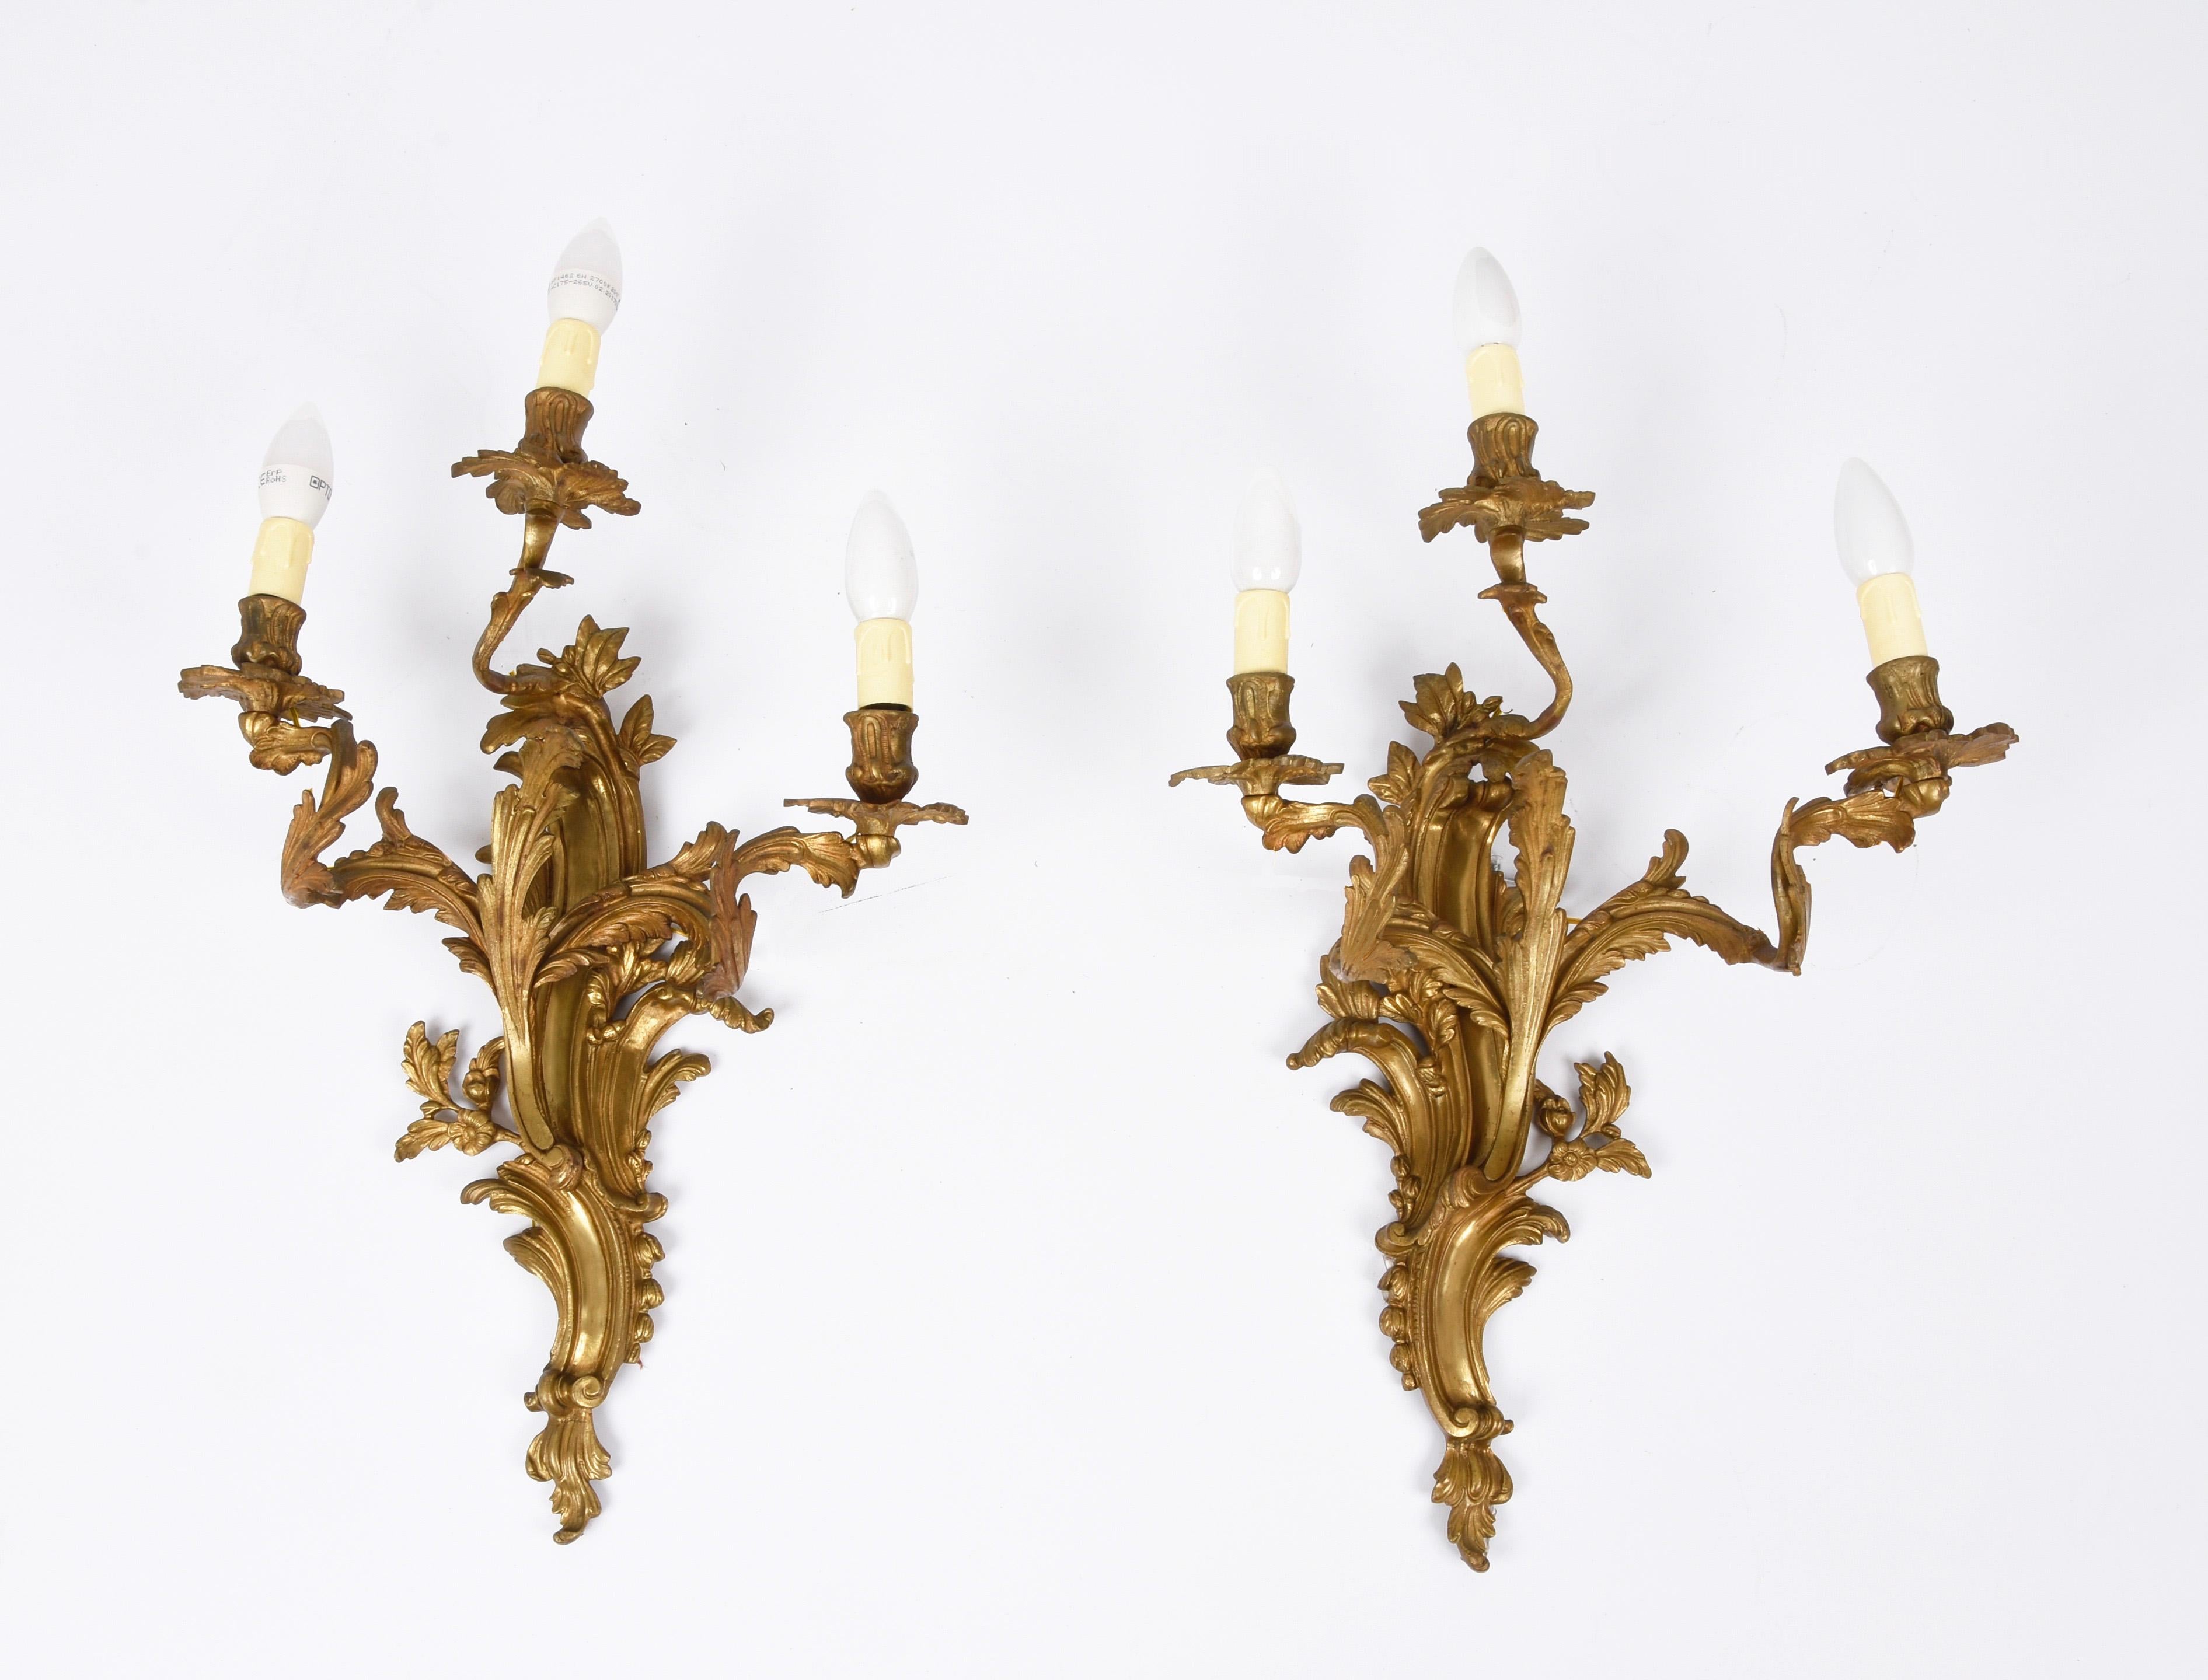 Sumptuous pair of early gilded bronze and brass scones. This fantastic set was made at the beginning of the 20th century in the style of Louis XV in France.

This luxurious pair is decorated with acanthus leaves and a floral theme. They were